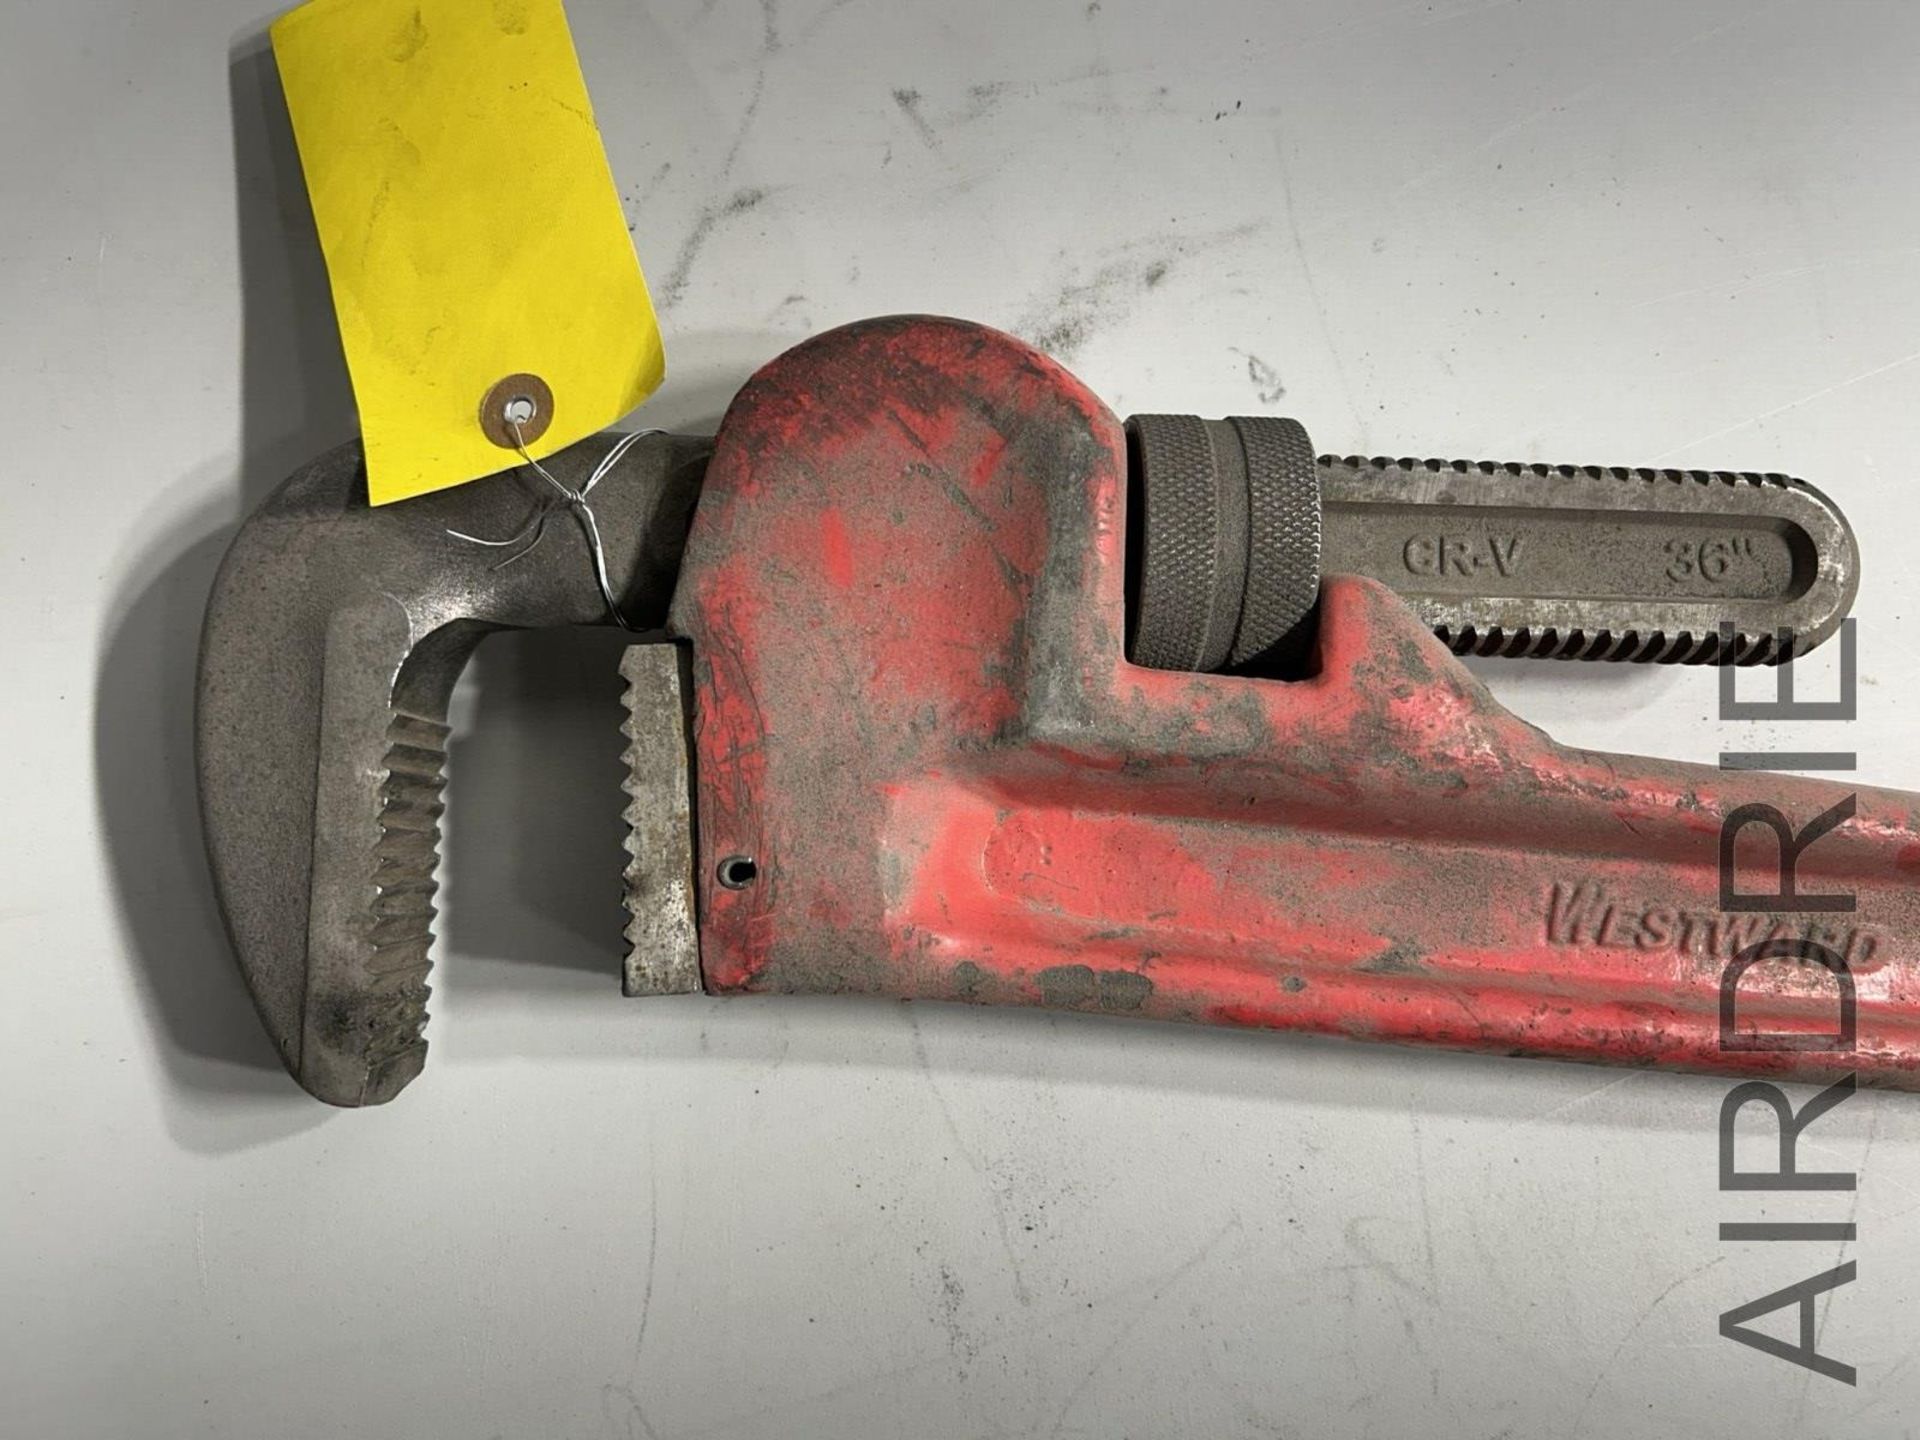 *OFFSITE* WESTWARD 36" STEEL PIPE WRENCH - Image 2 of 4